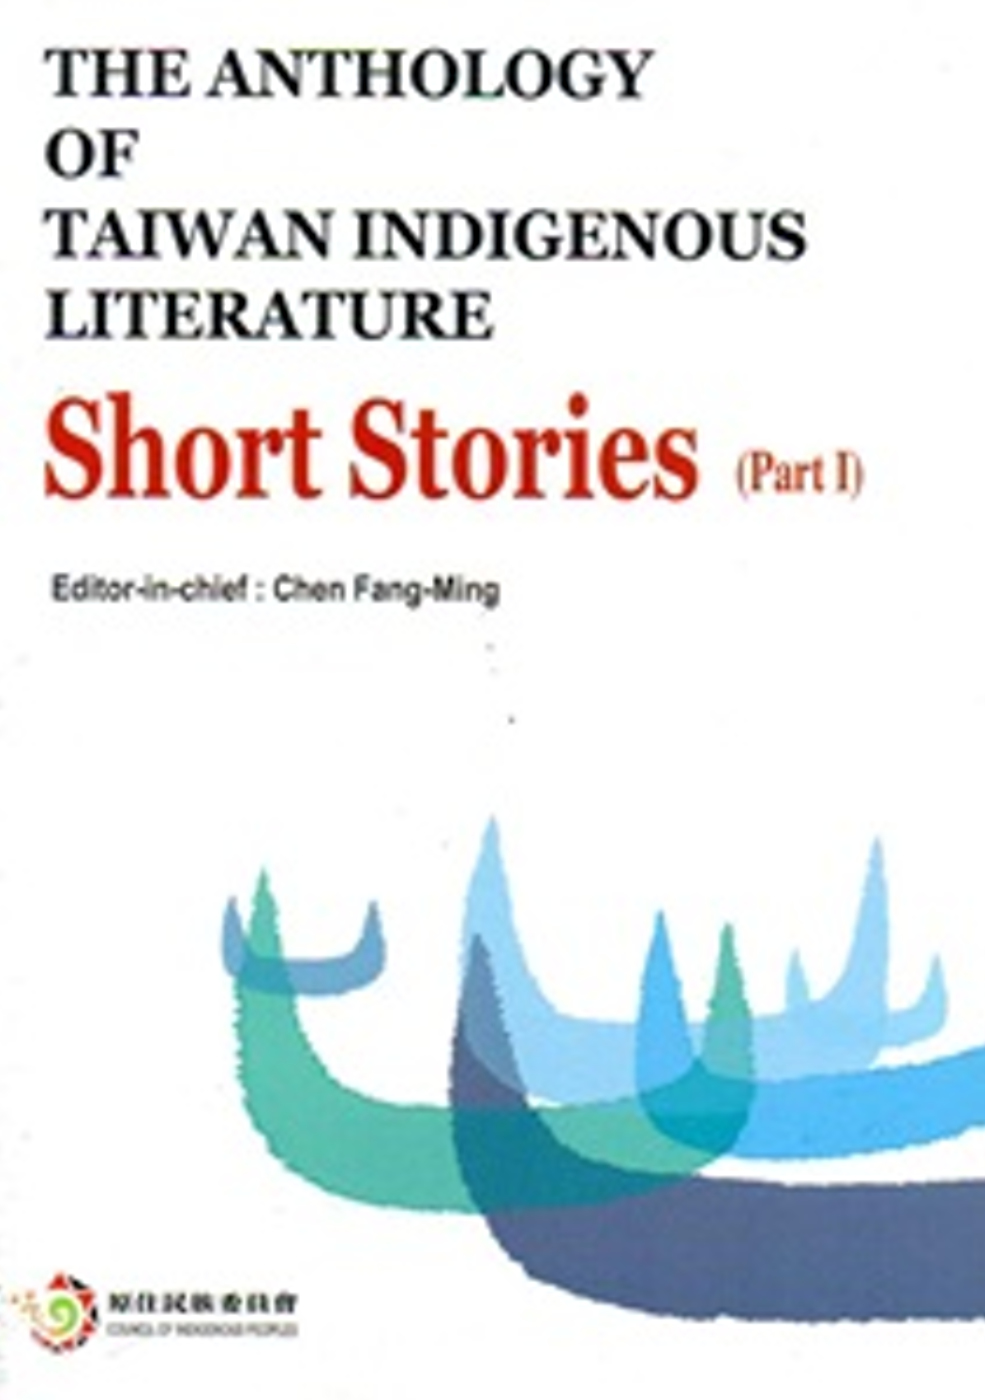 THE ANTHOLOGY OF TAIWAN INDIGENOUS LITERATURE：Short Stories Part I